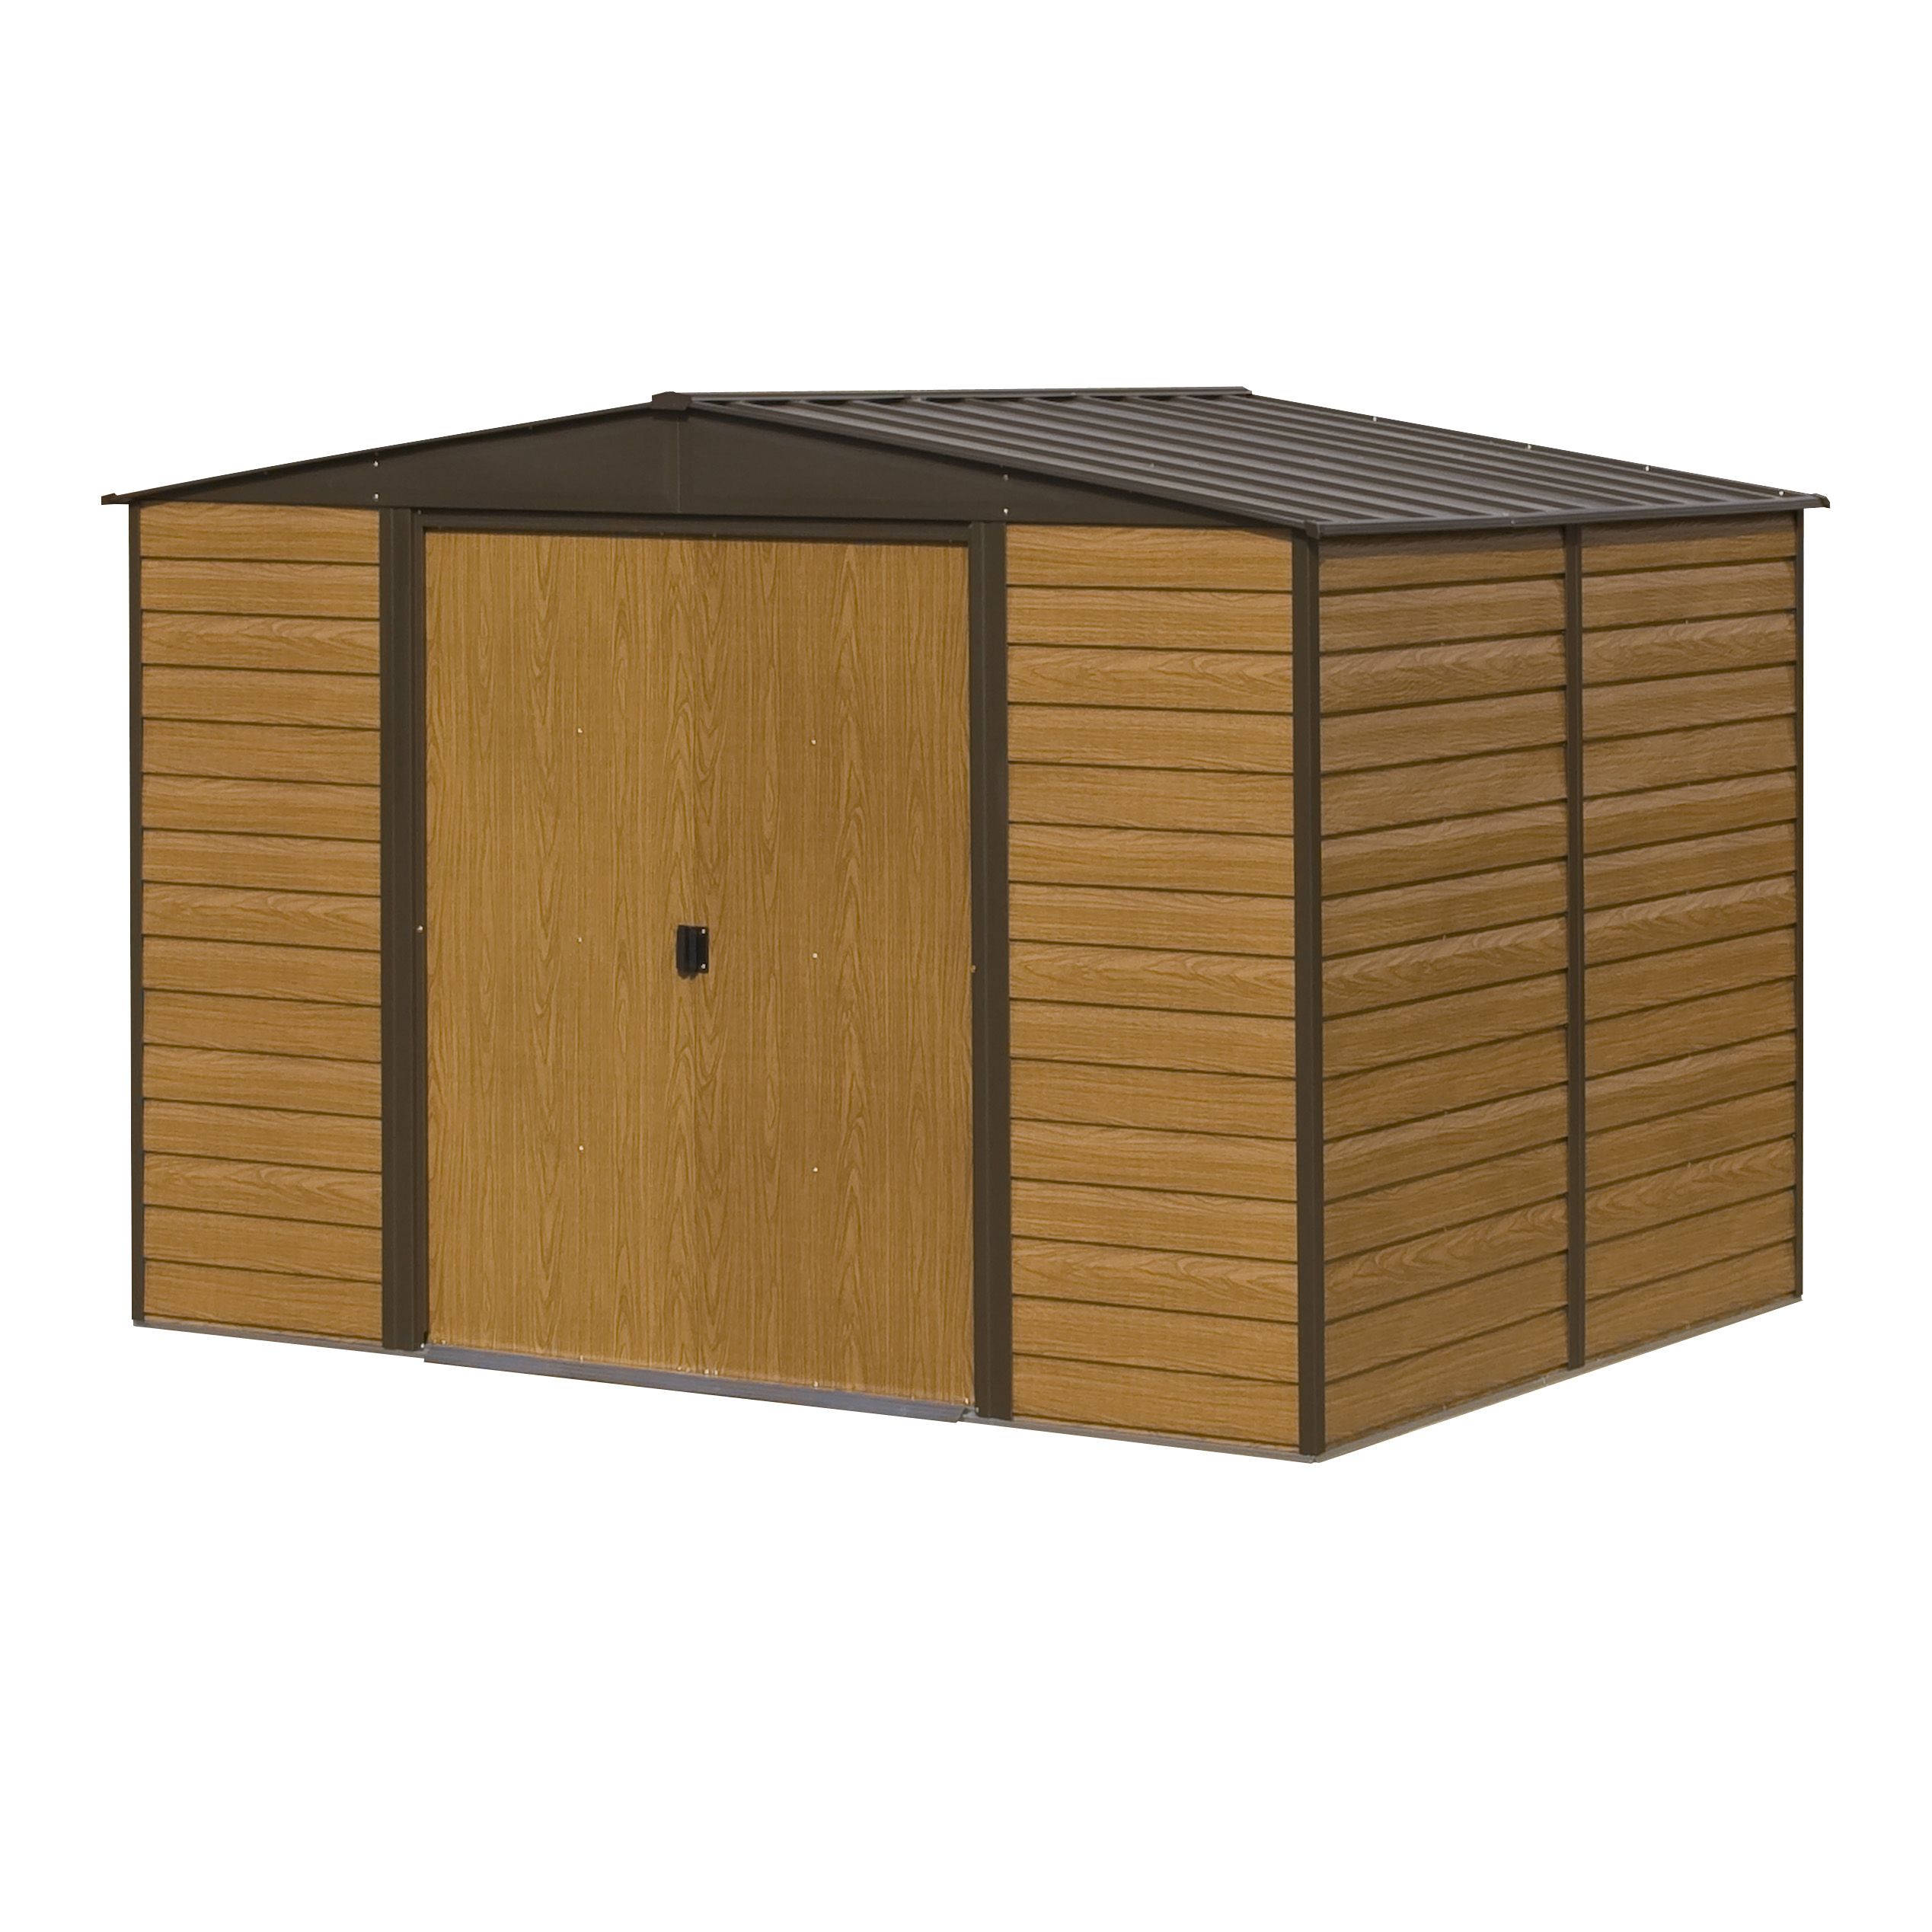 Image of Rowlinson Woodvale 10 x 12ft Large Double Door Metal Apex Shed without Floor